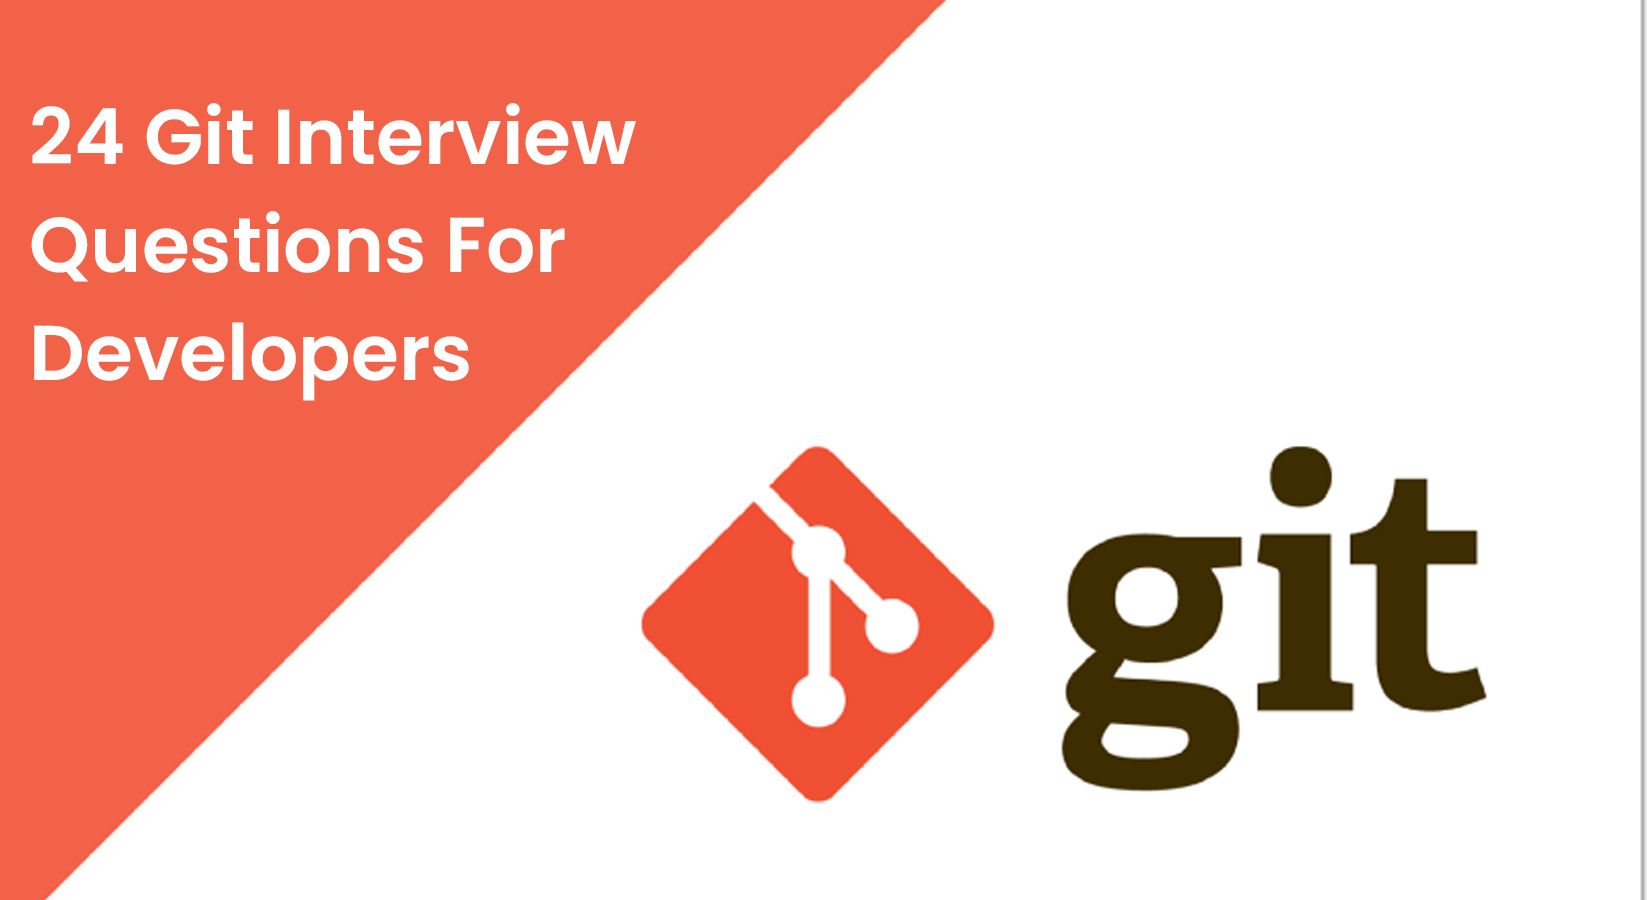 24 Git Interview Questions For Developers